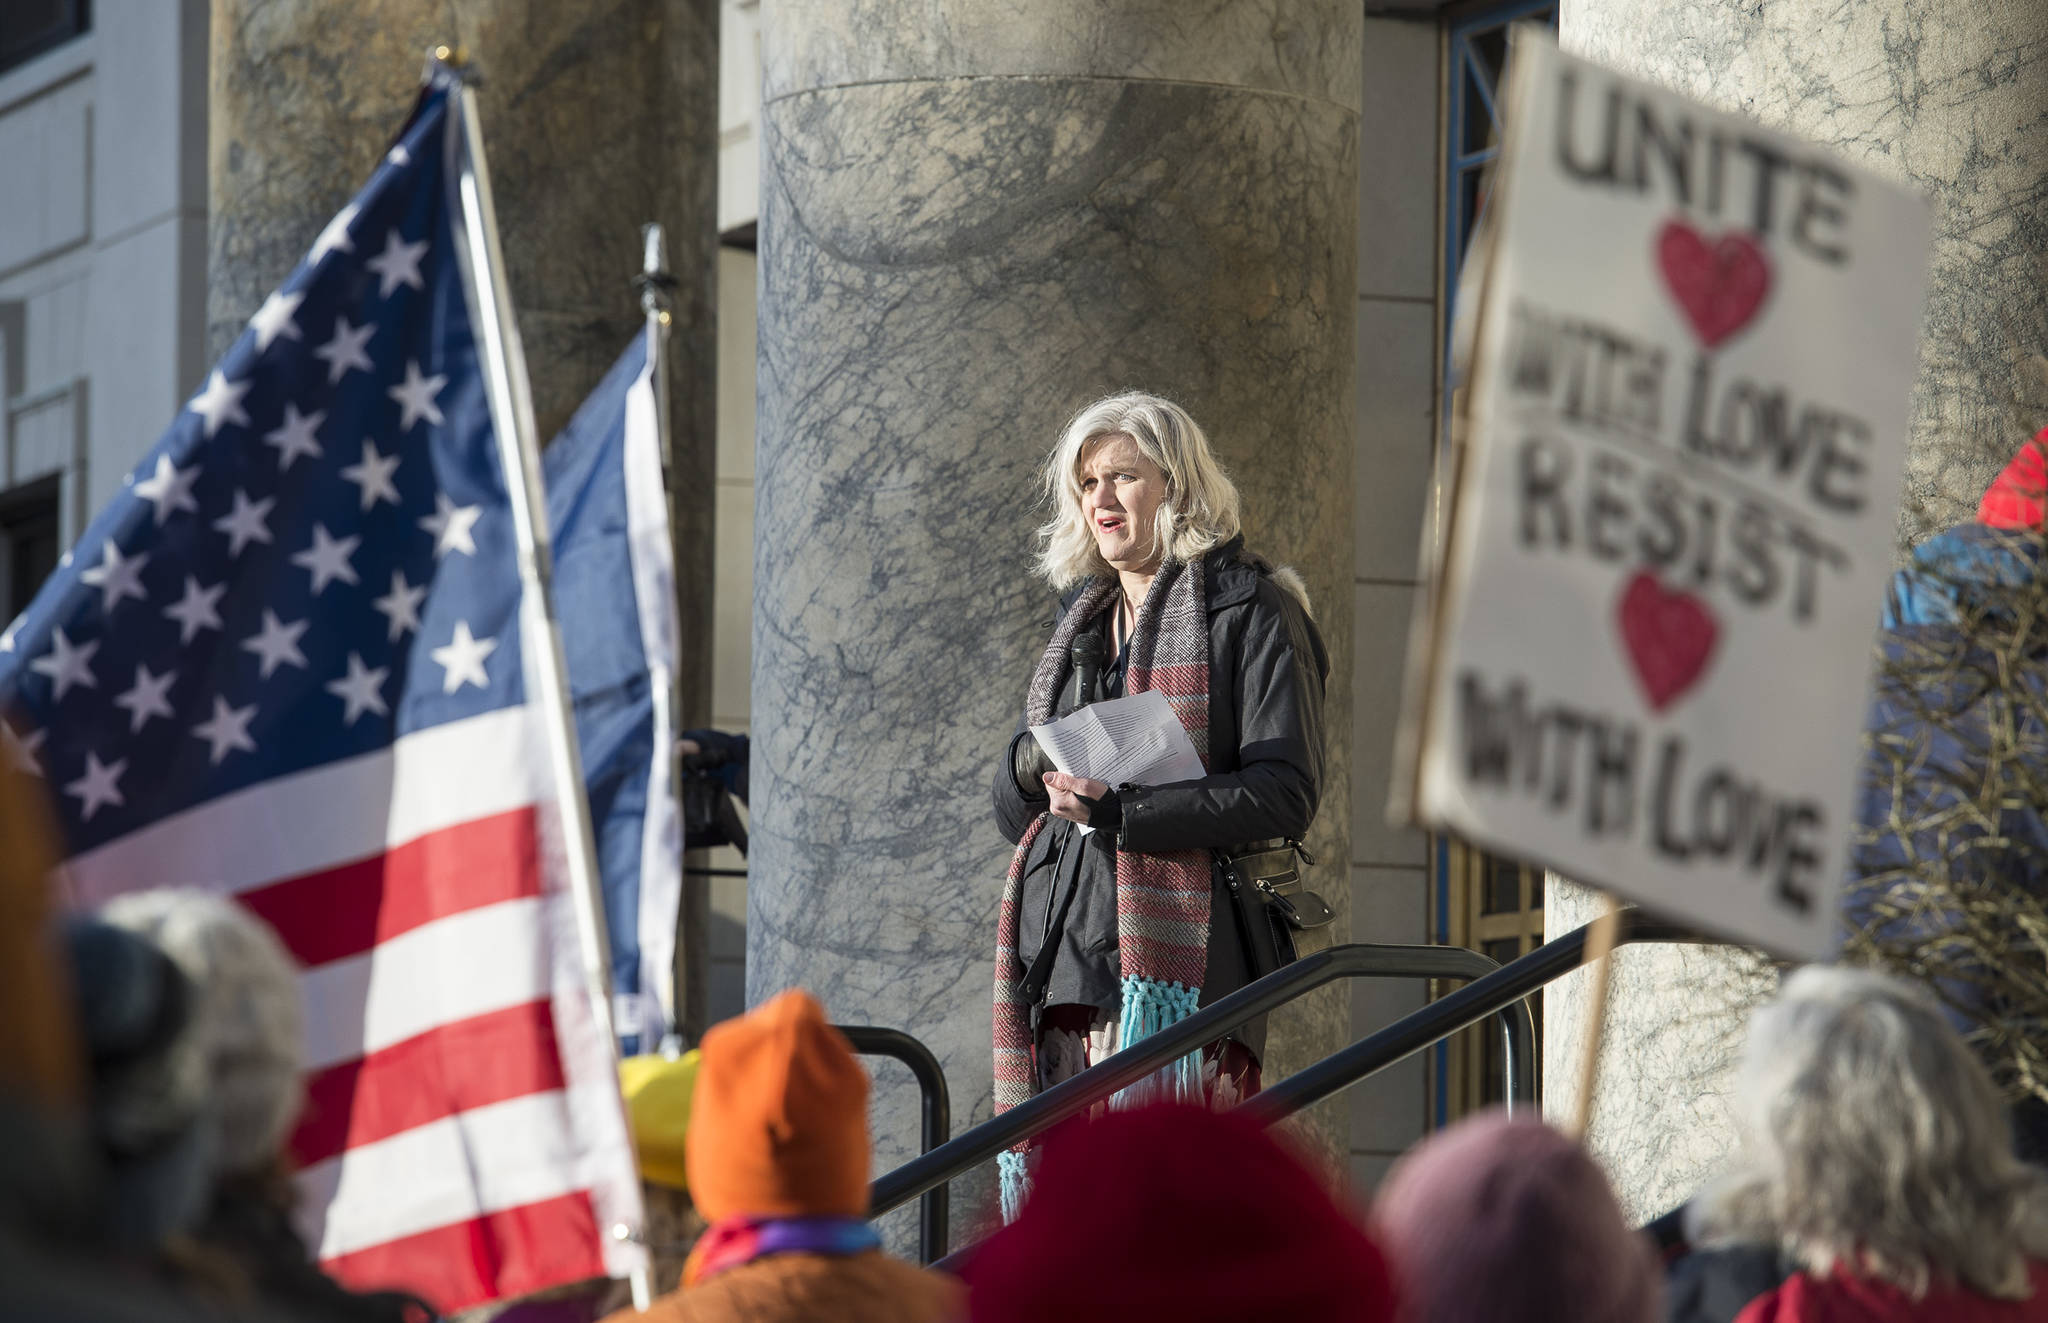 Allison Caputo speaks at the Women’s March on Juneau in front of the Alaska State Capitol on Saturday, Jan. 19, 2019. (Michael Penn | Juneau Empire)